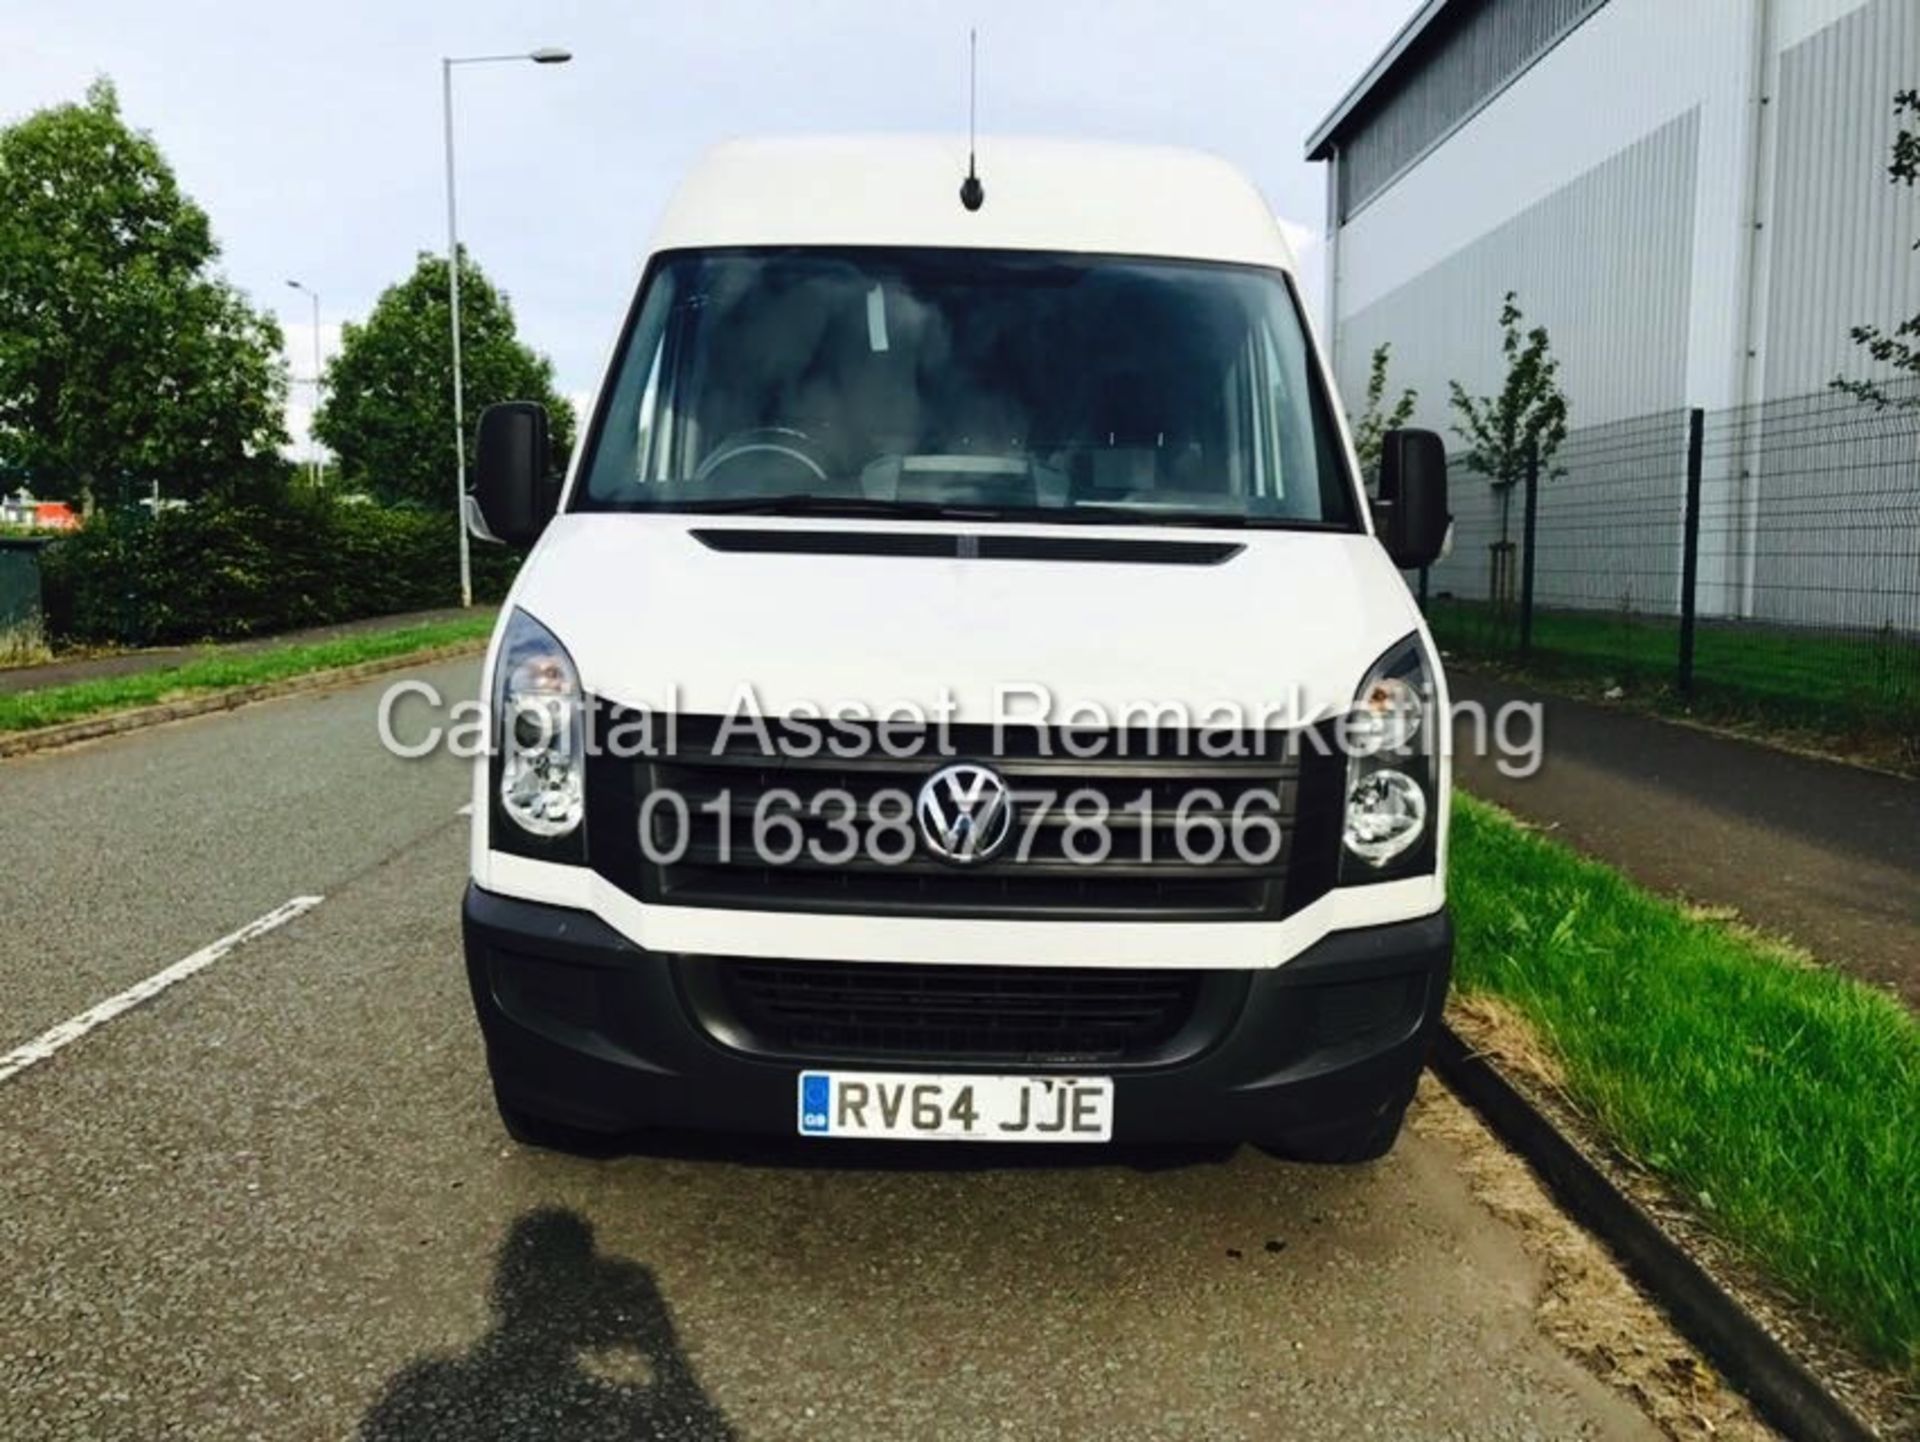 LATE ENTRY - VOLKSWAGEN CRAFTER 2.0TDI '136" LONG WHEEL BASE - 2015 REG - 1 OWNER- ONLY 68K MILES!!! - Image 5 of 12